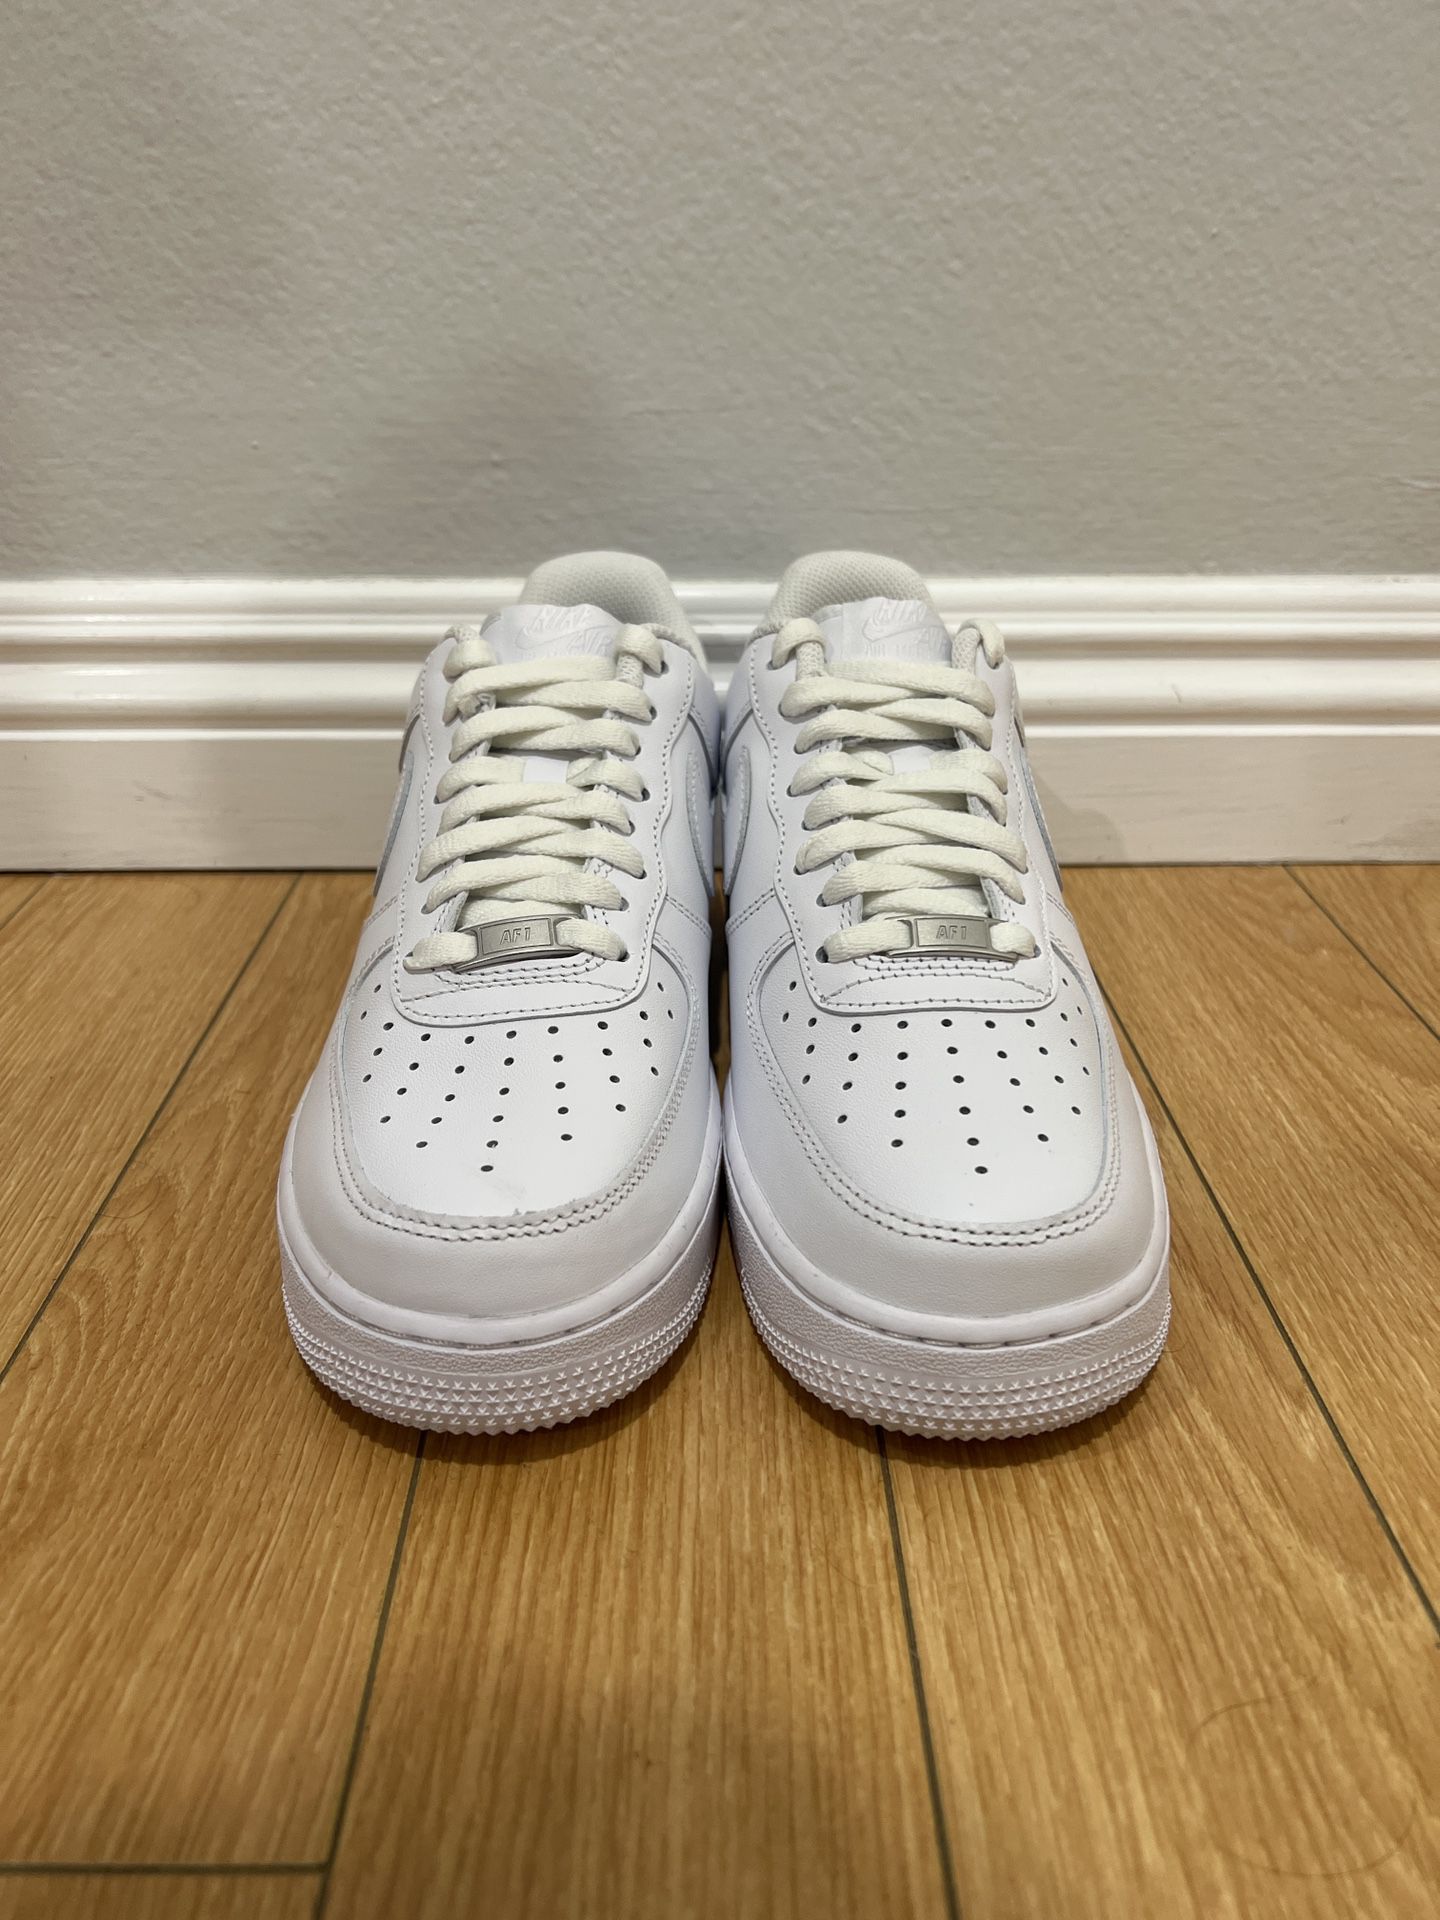 Nike Air Force 1 “What The LA” for Sale in La Palma, CA - OfferUp